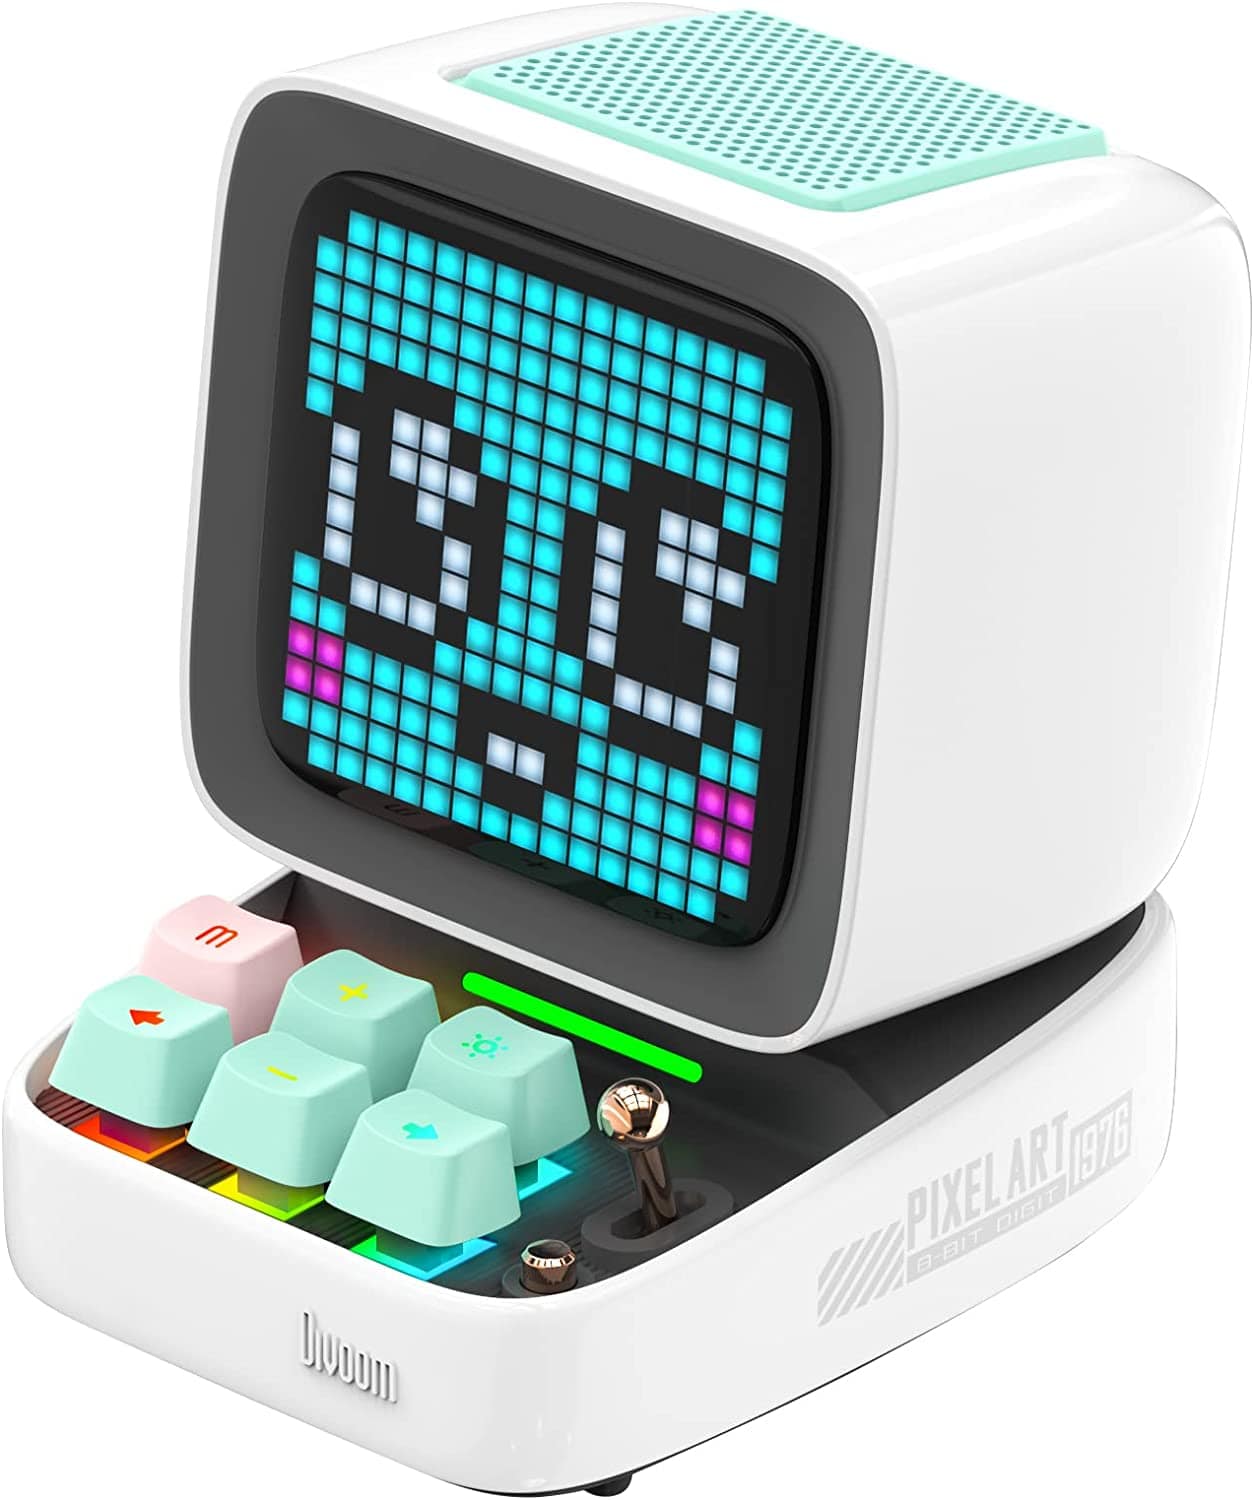 SmartTechShopping Electronics White Divoom Ditoo Retro Pixel Art Game Bluetooth Speaker - App-Controlled LED Screen (Pink)